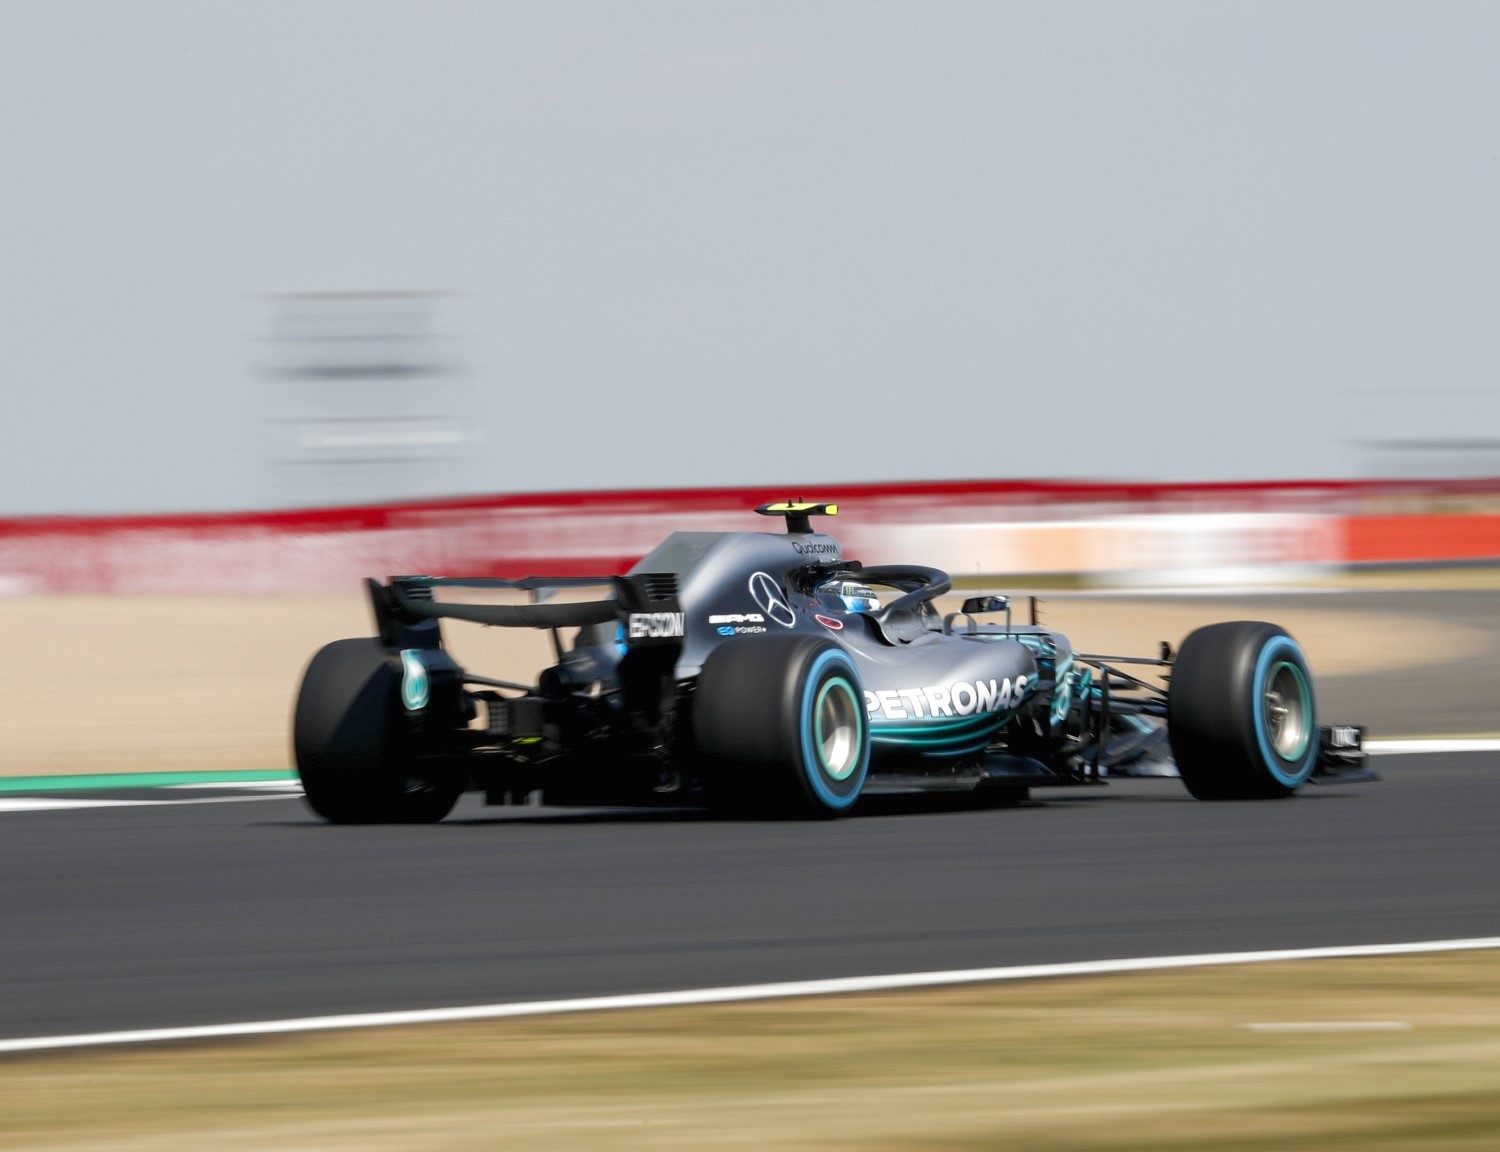 Silverstone is so bumpy it rattles your brain says Hamilton